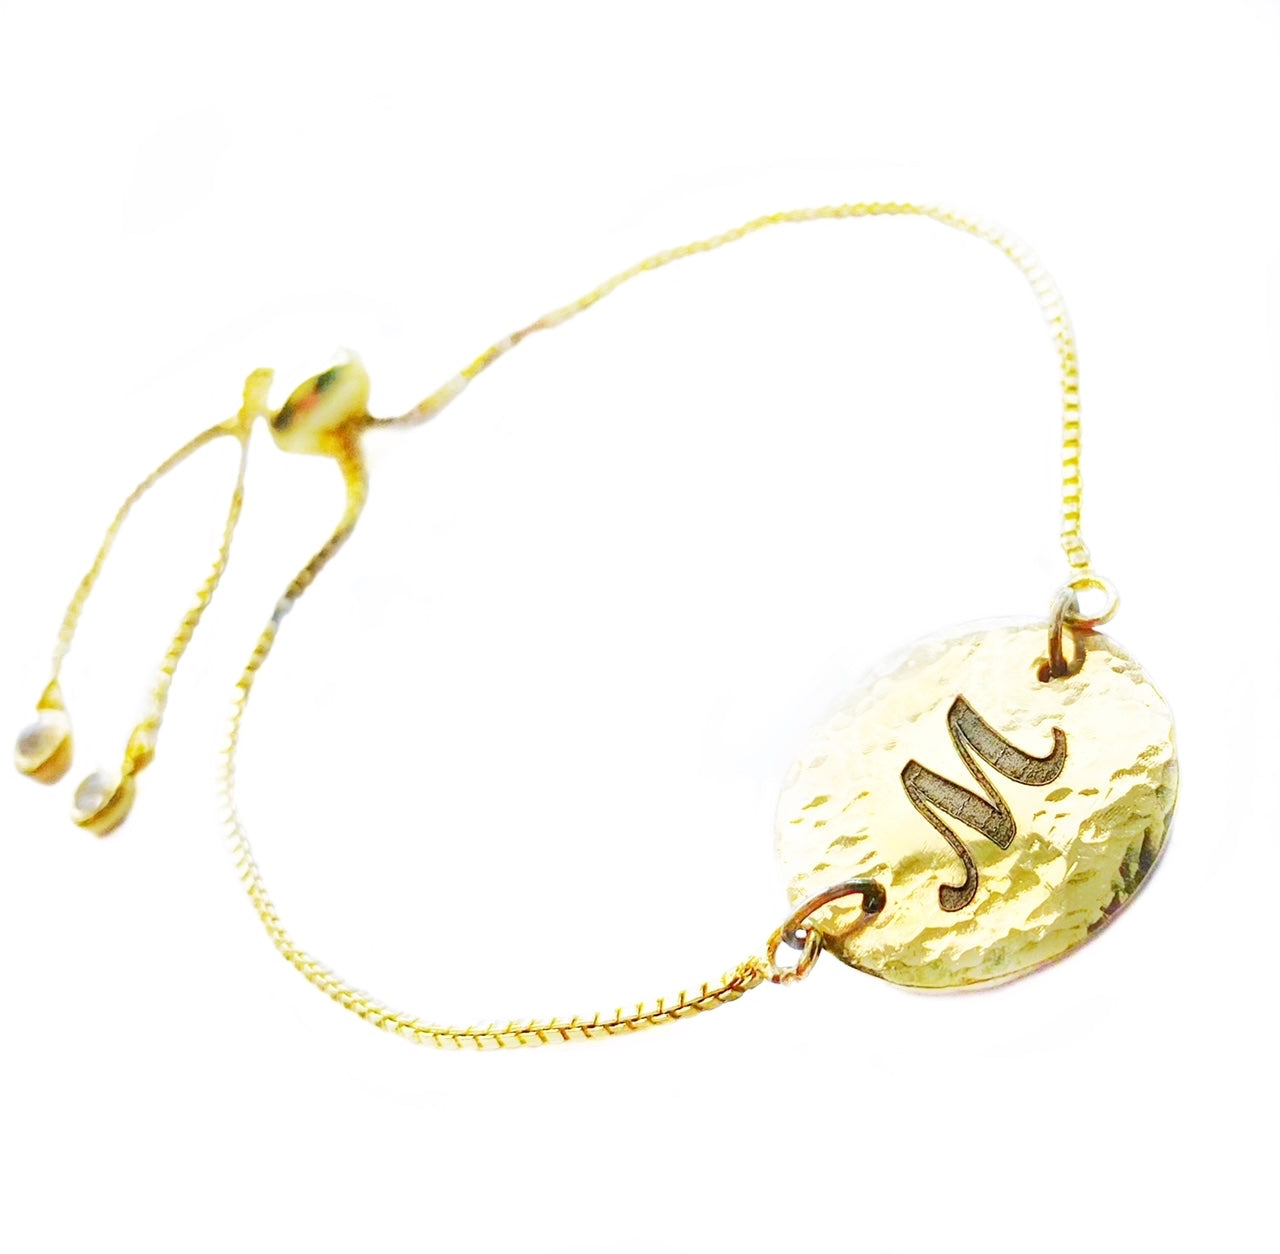 Gold-Plated Boho Bracelet with Hammered Round Disc